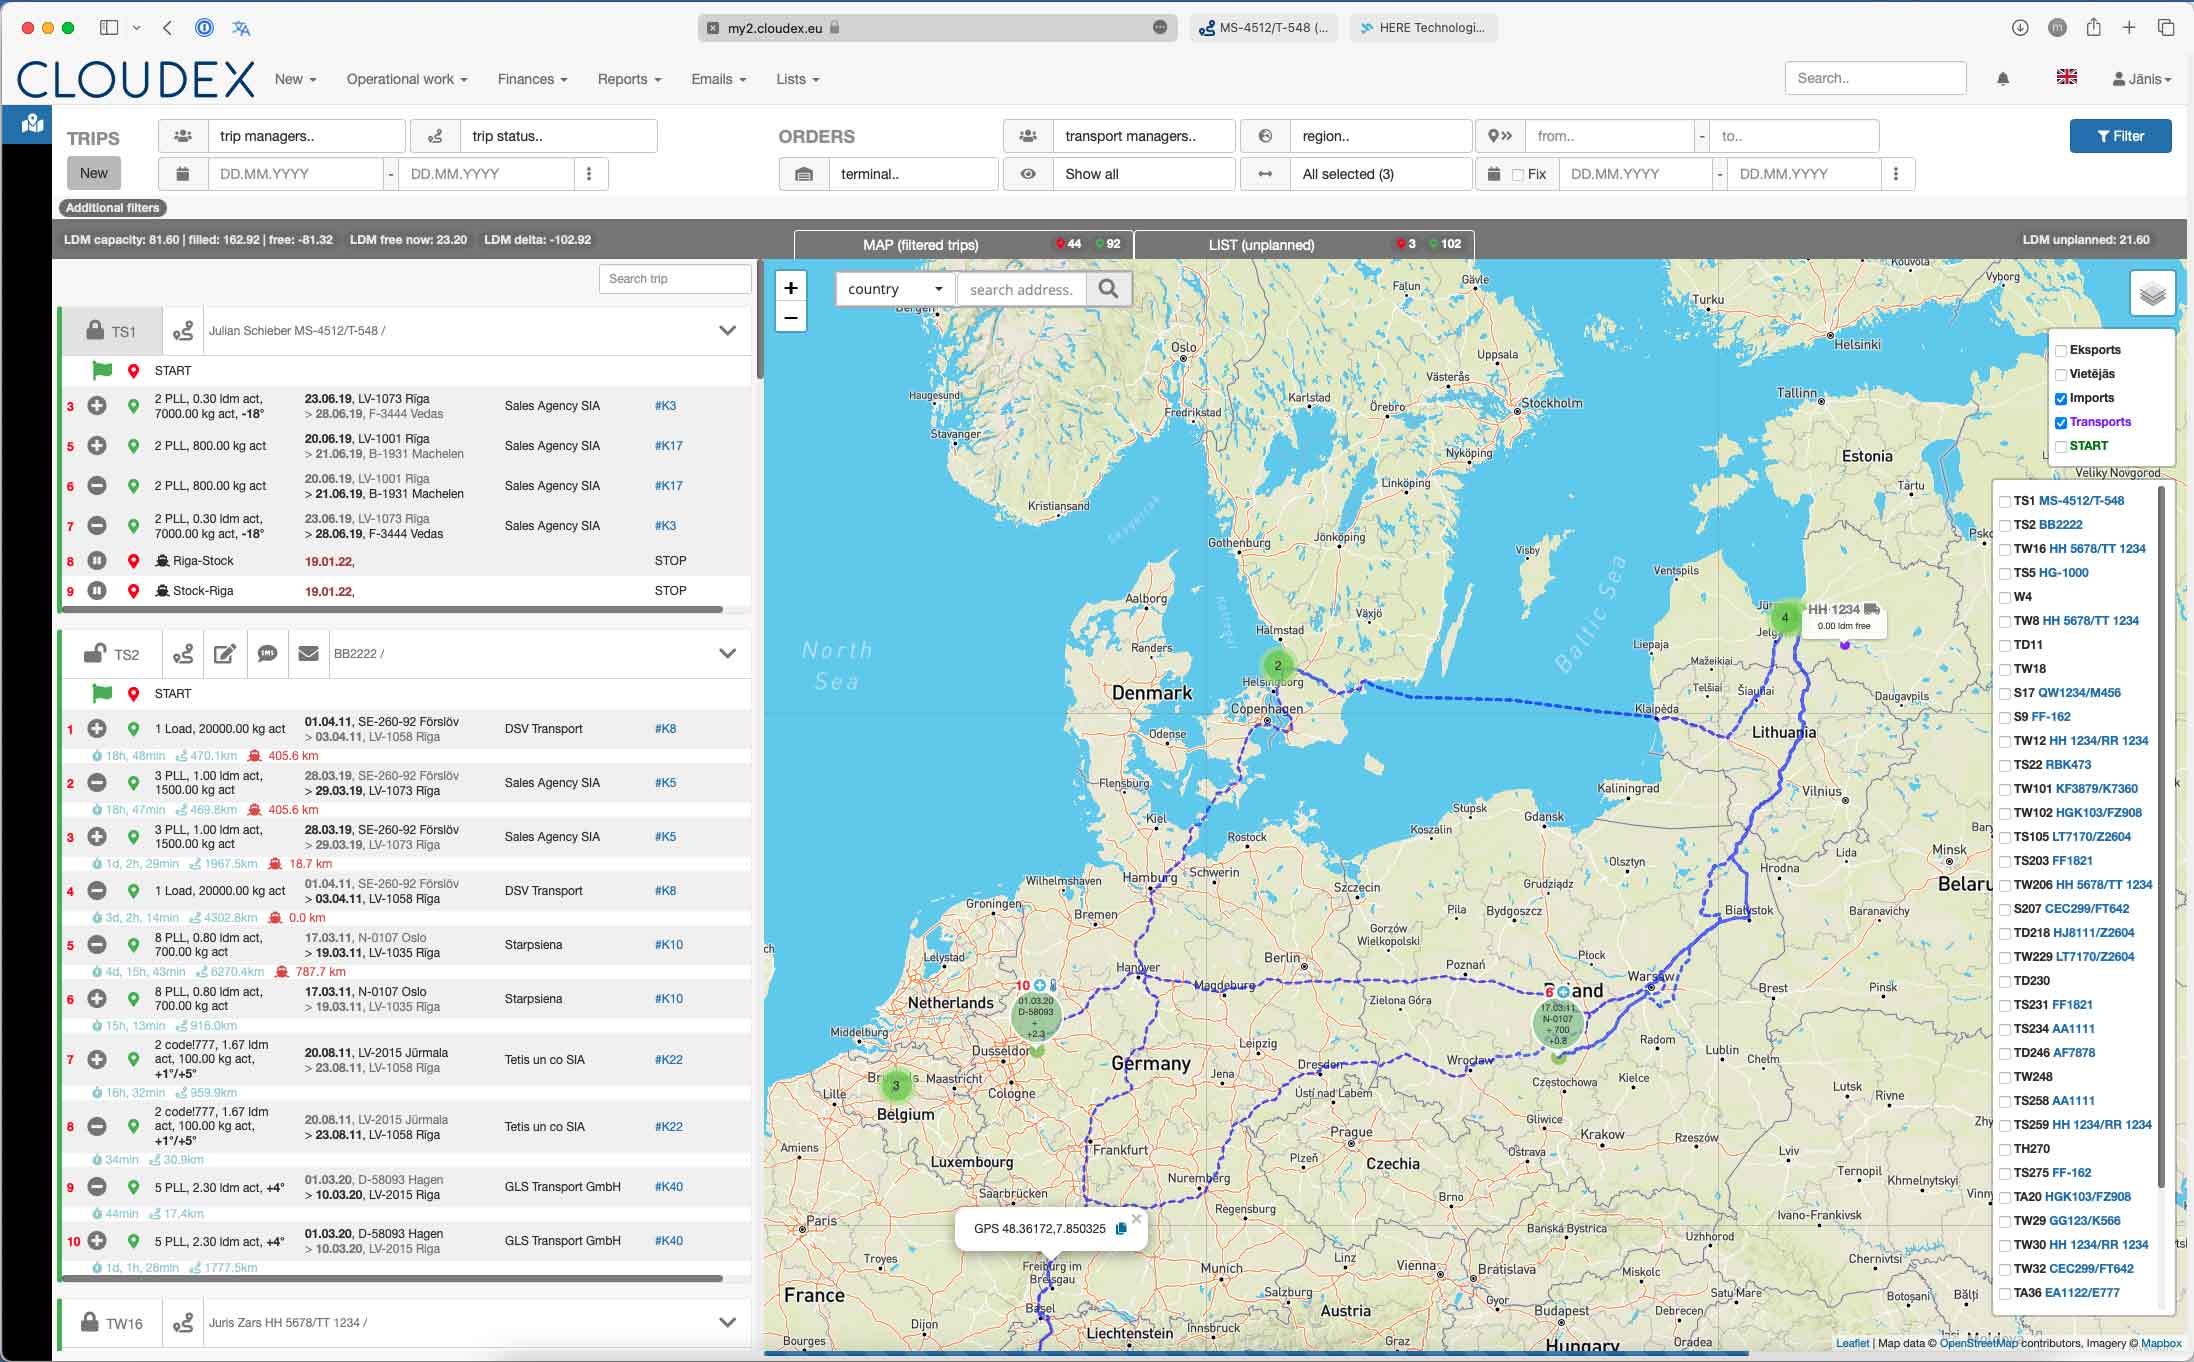 CLOUDEX route planning is developed to help companies optimize their transportation operations and improve efficiency.